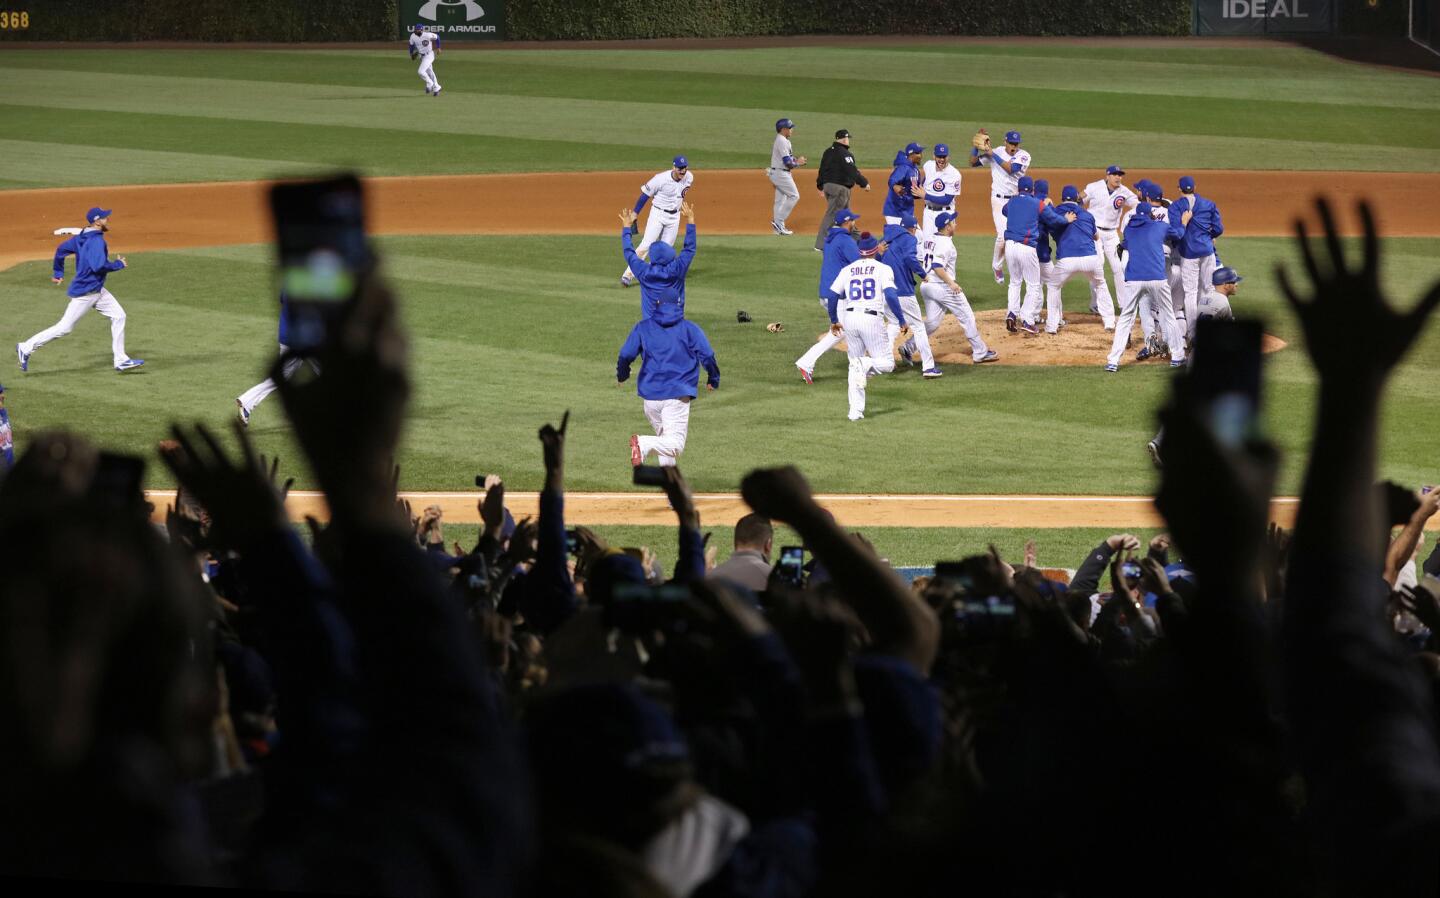 The Chicago Cubs and fans celebrate a 5-0 win over the Los Angeles Dodgers in Game 6 of the NLCS to advance to the World Series.